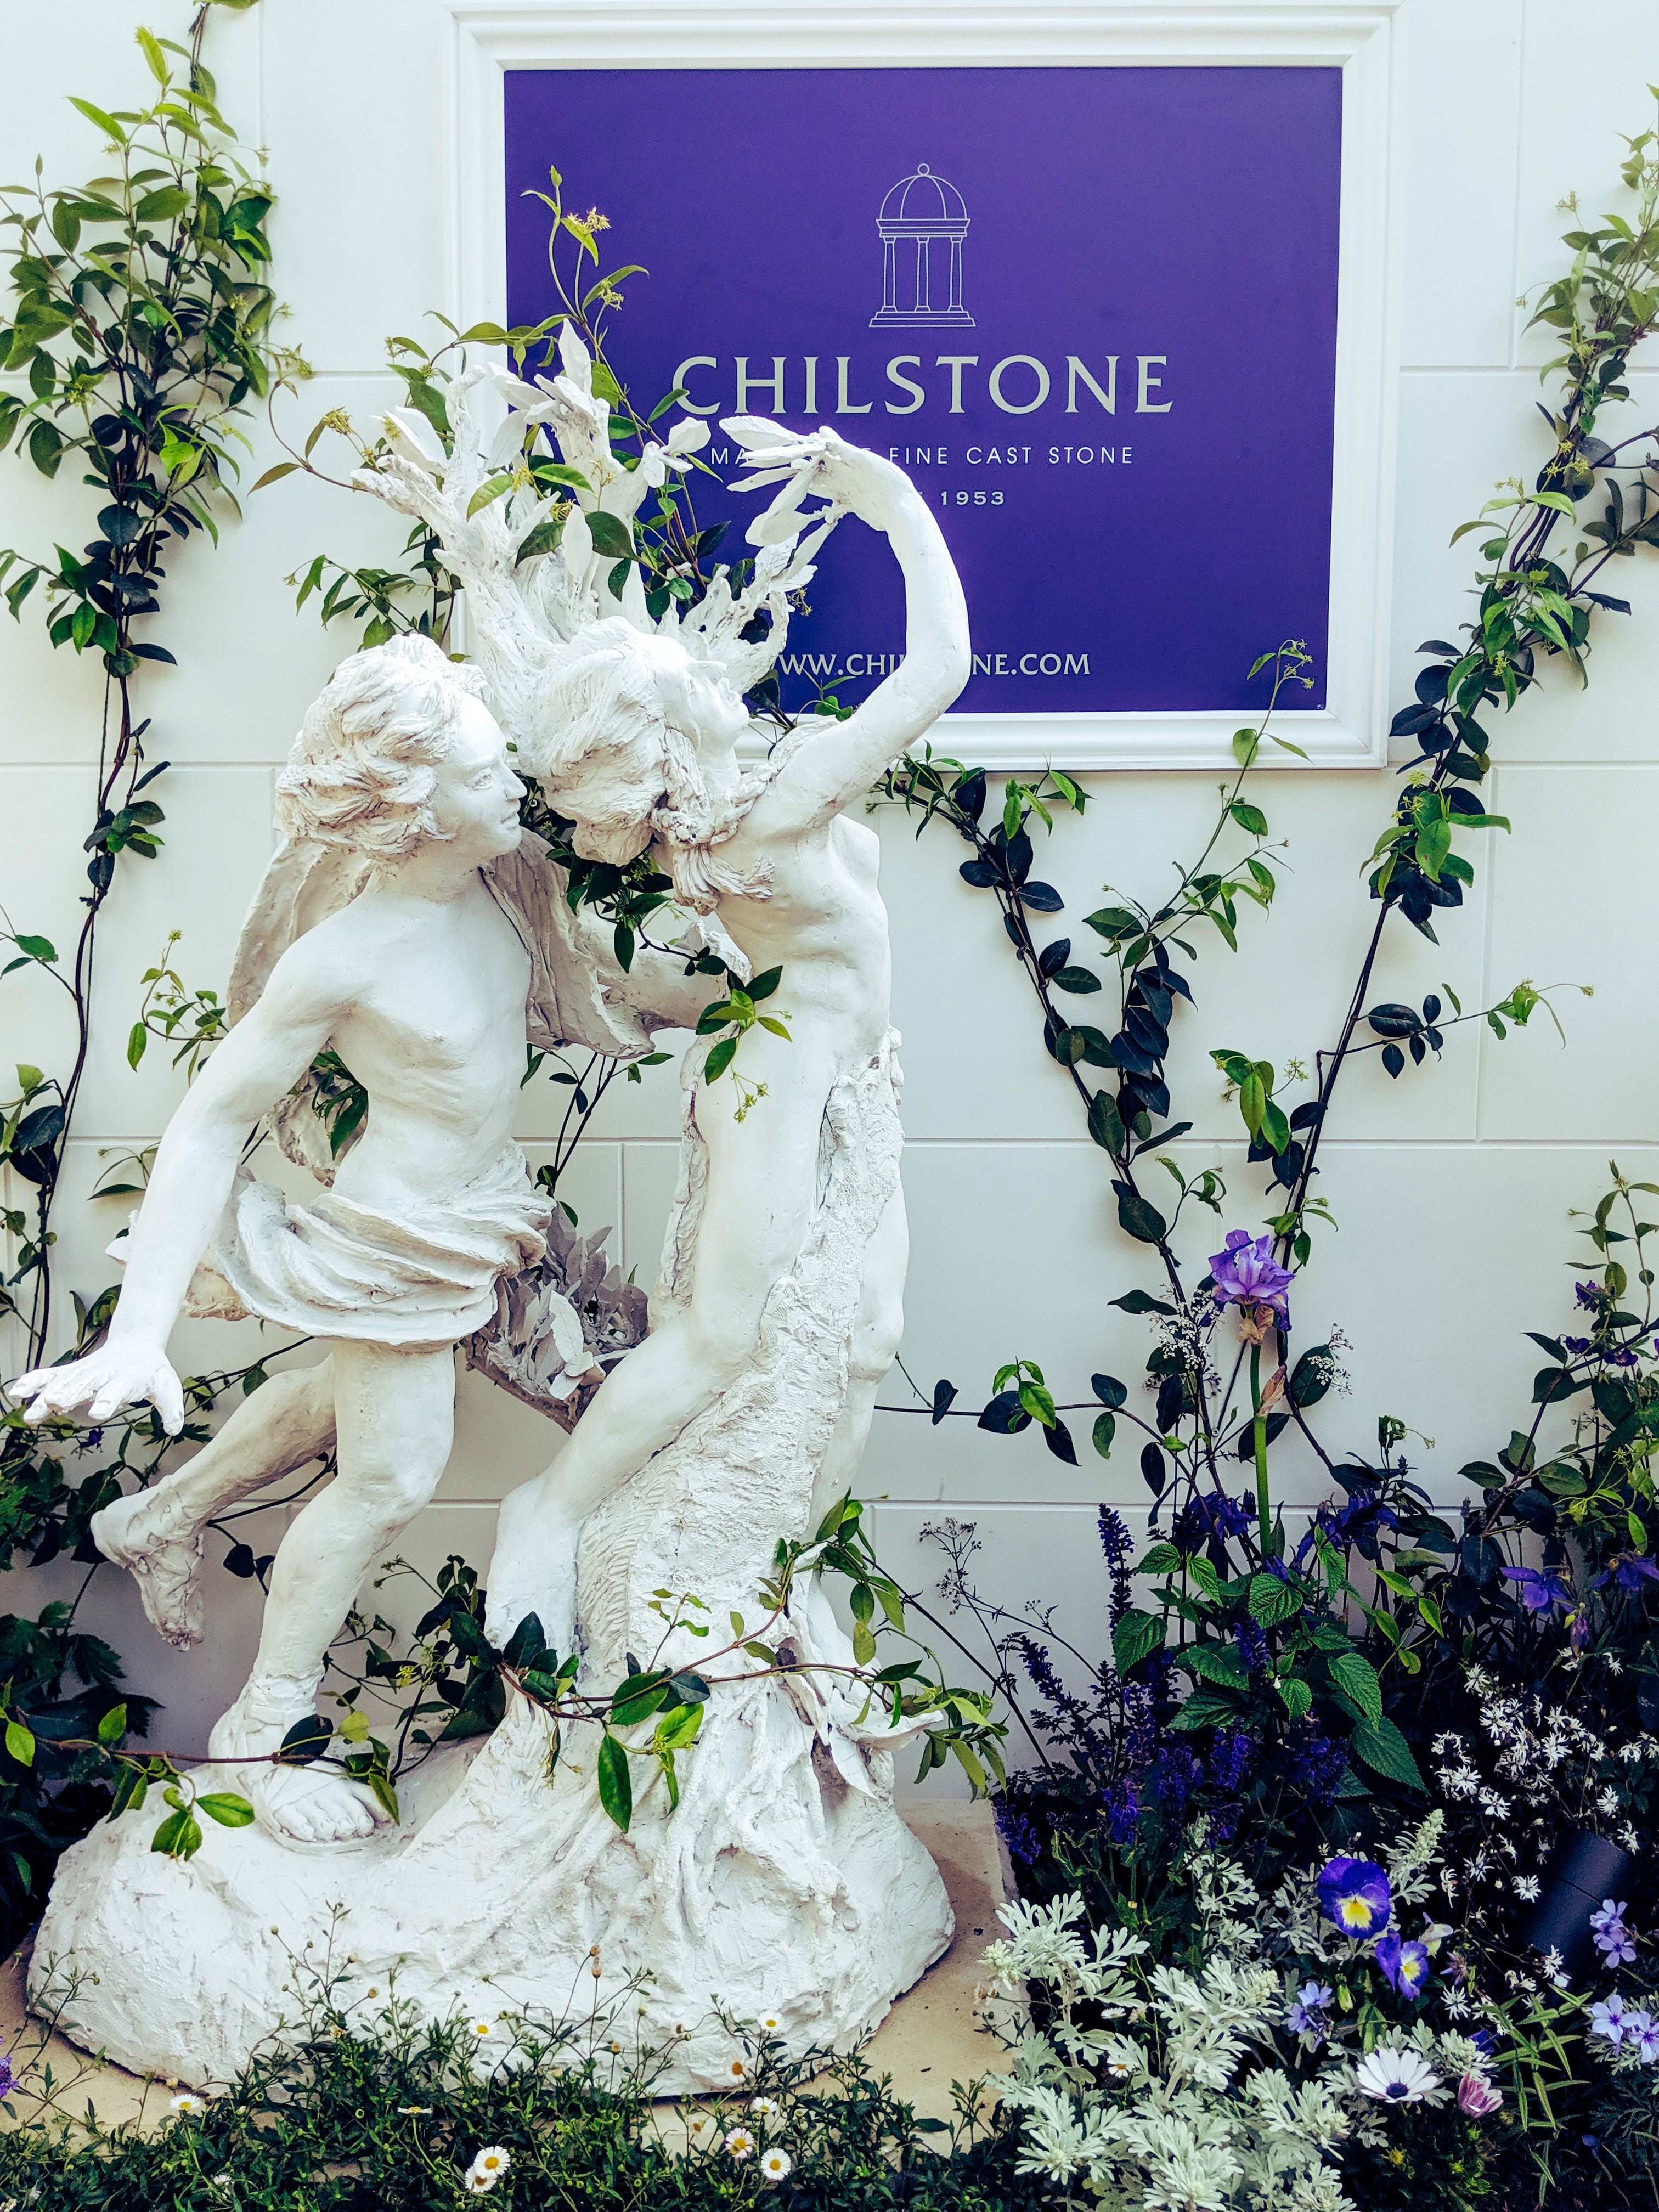 Copy of Apollo and Daphne Greek God and Goddess statue in marble resin in front of white wall with vines, purple flowers and purple Chilstone sign